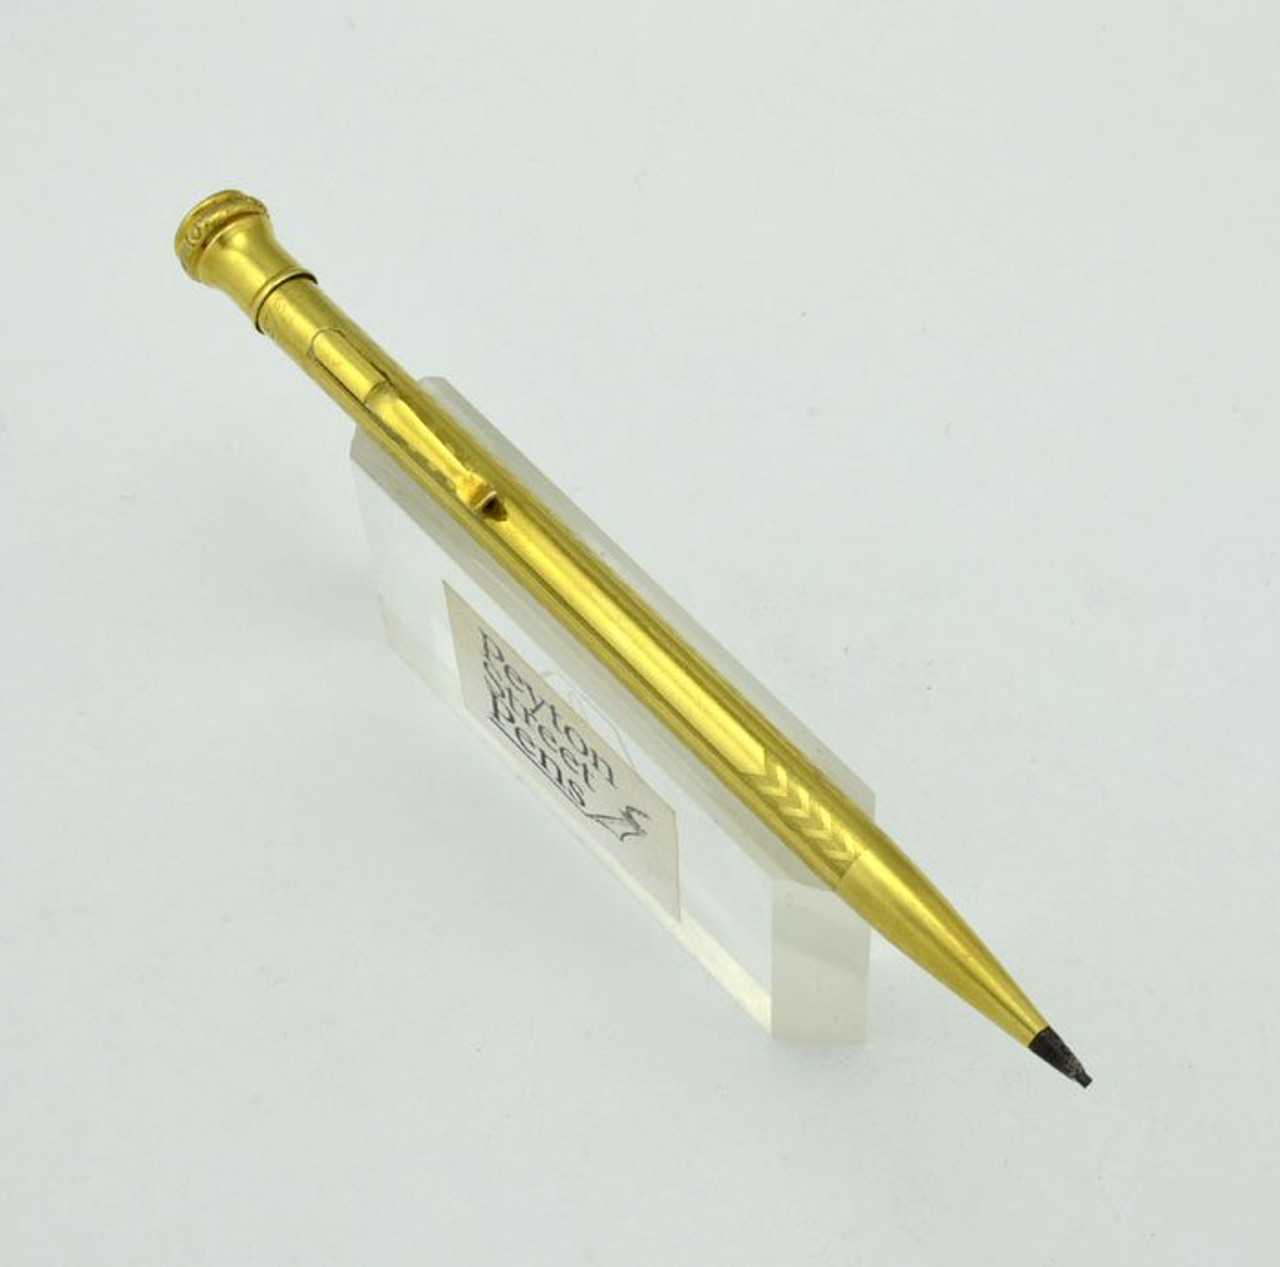 Wahl Eversharp Mechanical Pencil - Full Size, Gold Filled, Chevron Design (Very Nice, Works Well)